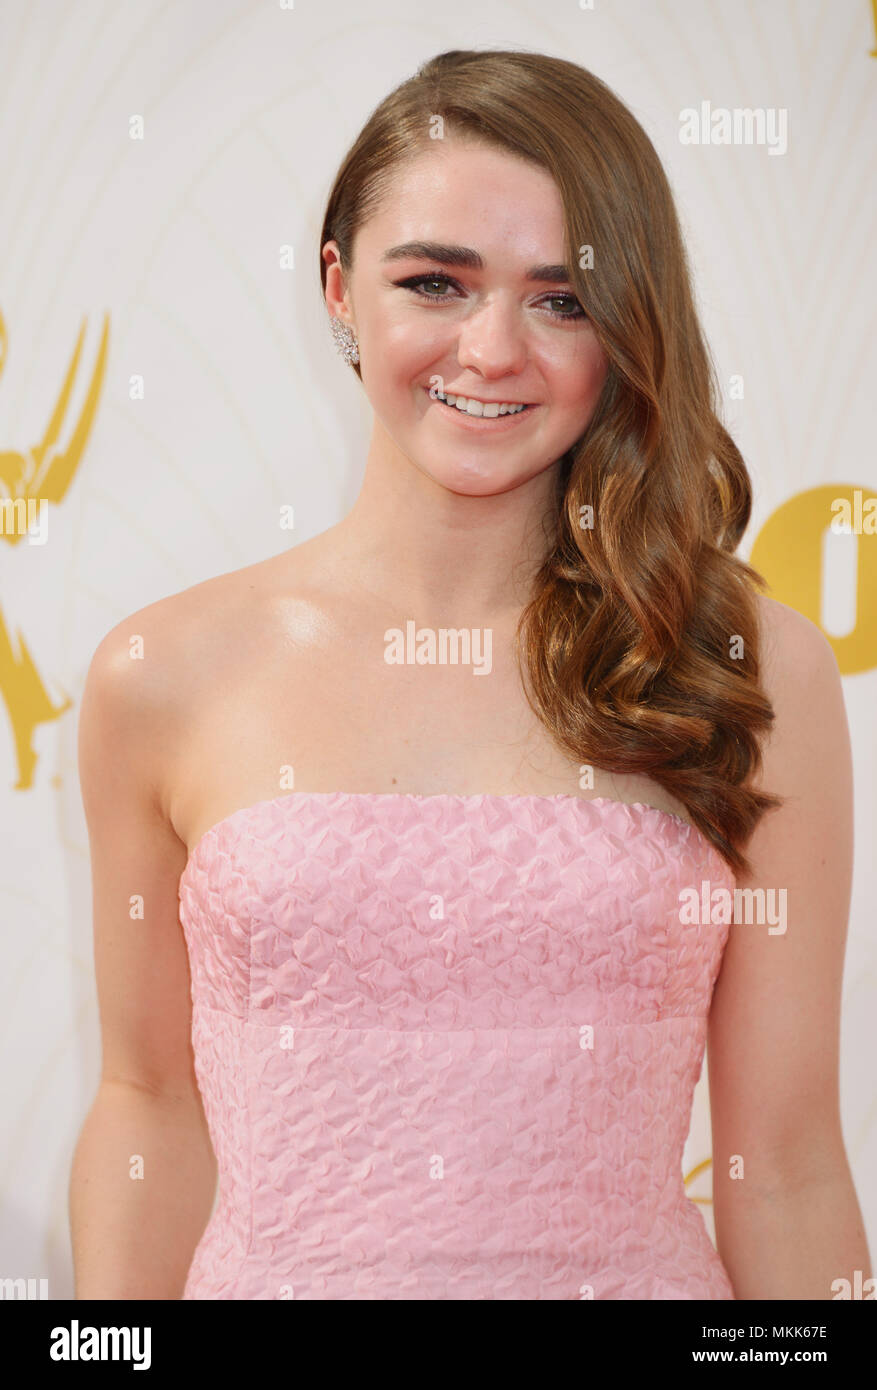 Maisie Williams 172 at The 67th Emmy Awards 2015 at the Microsoft Theatre in Los Angeles. September 20, 2015.Maisie Williams 172  Event in Hollywood Life - California,  Red Carpet Event, Vertical, USA, Film Industry, Celebrities,  Photography, Bestof, Arts Culture and Entertainment, Topix Celebrities fashion / one person, Vertical, Best of, Hollywood Life, Event in Hollywood Life - California,  Red Carpet and backstage, USA, Film Industry, Celebrities,  movie celebrities, TV celebrities, Music celebrities, Photography, Bestof, Arts Culture and Entertainment,  Topix, headshot, vertical, from th Stock Photo